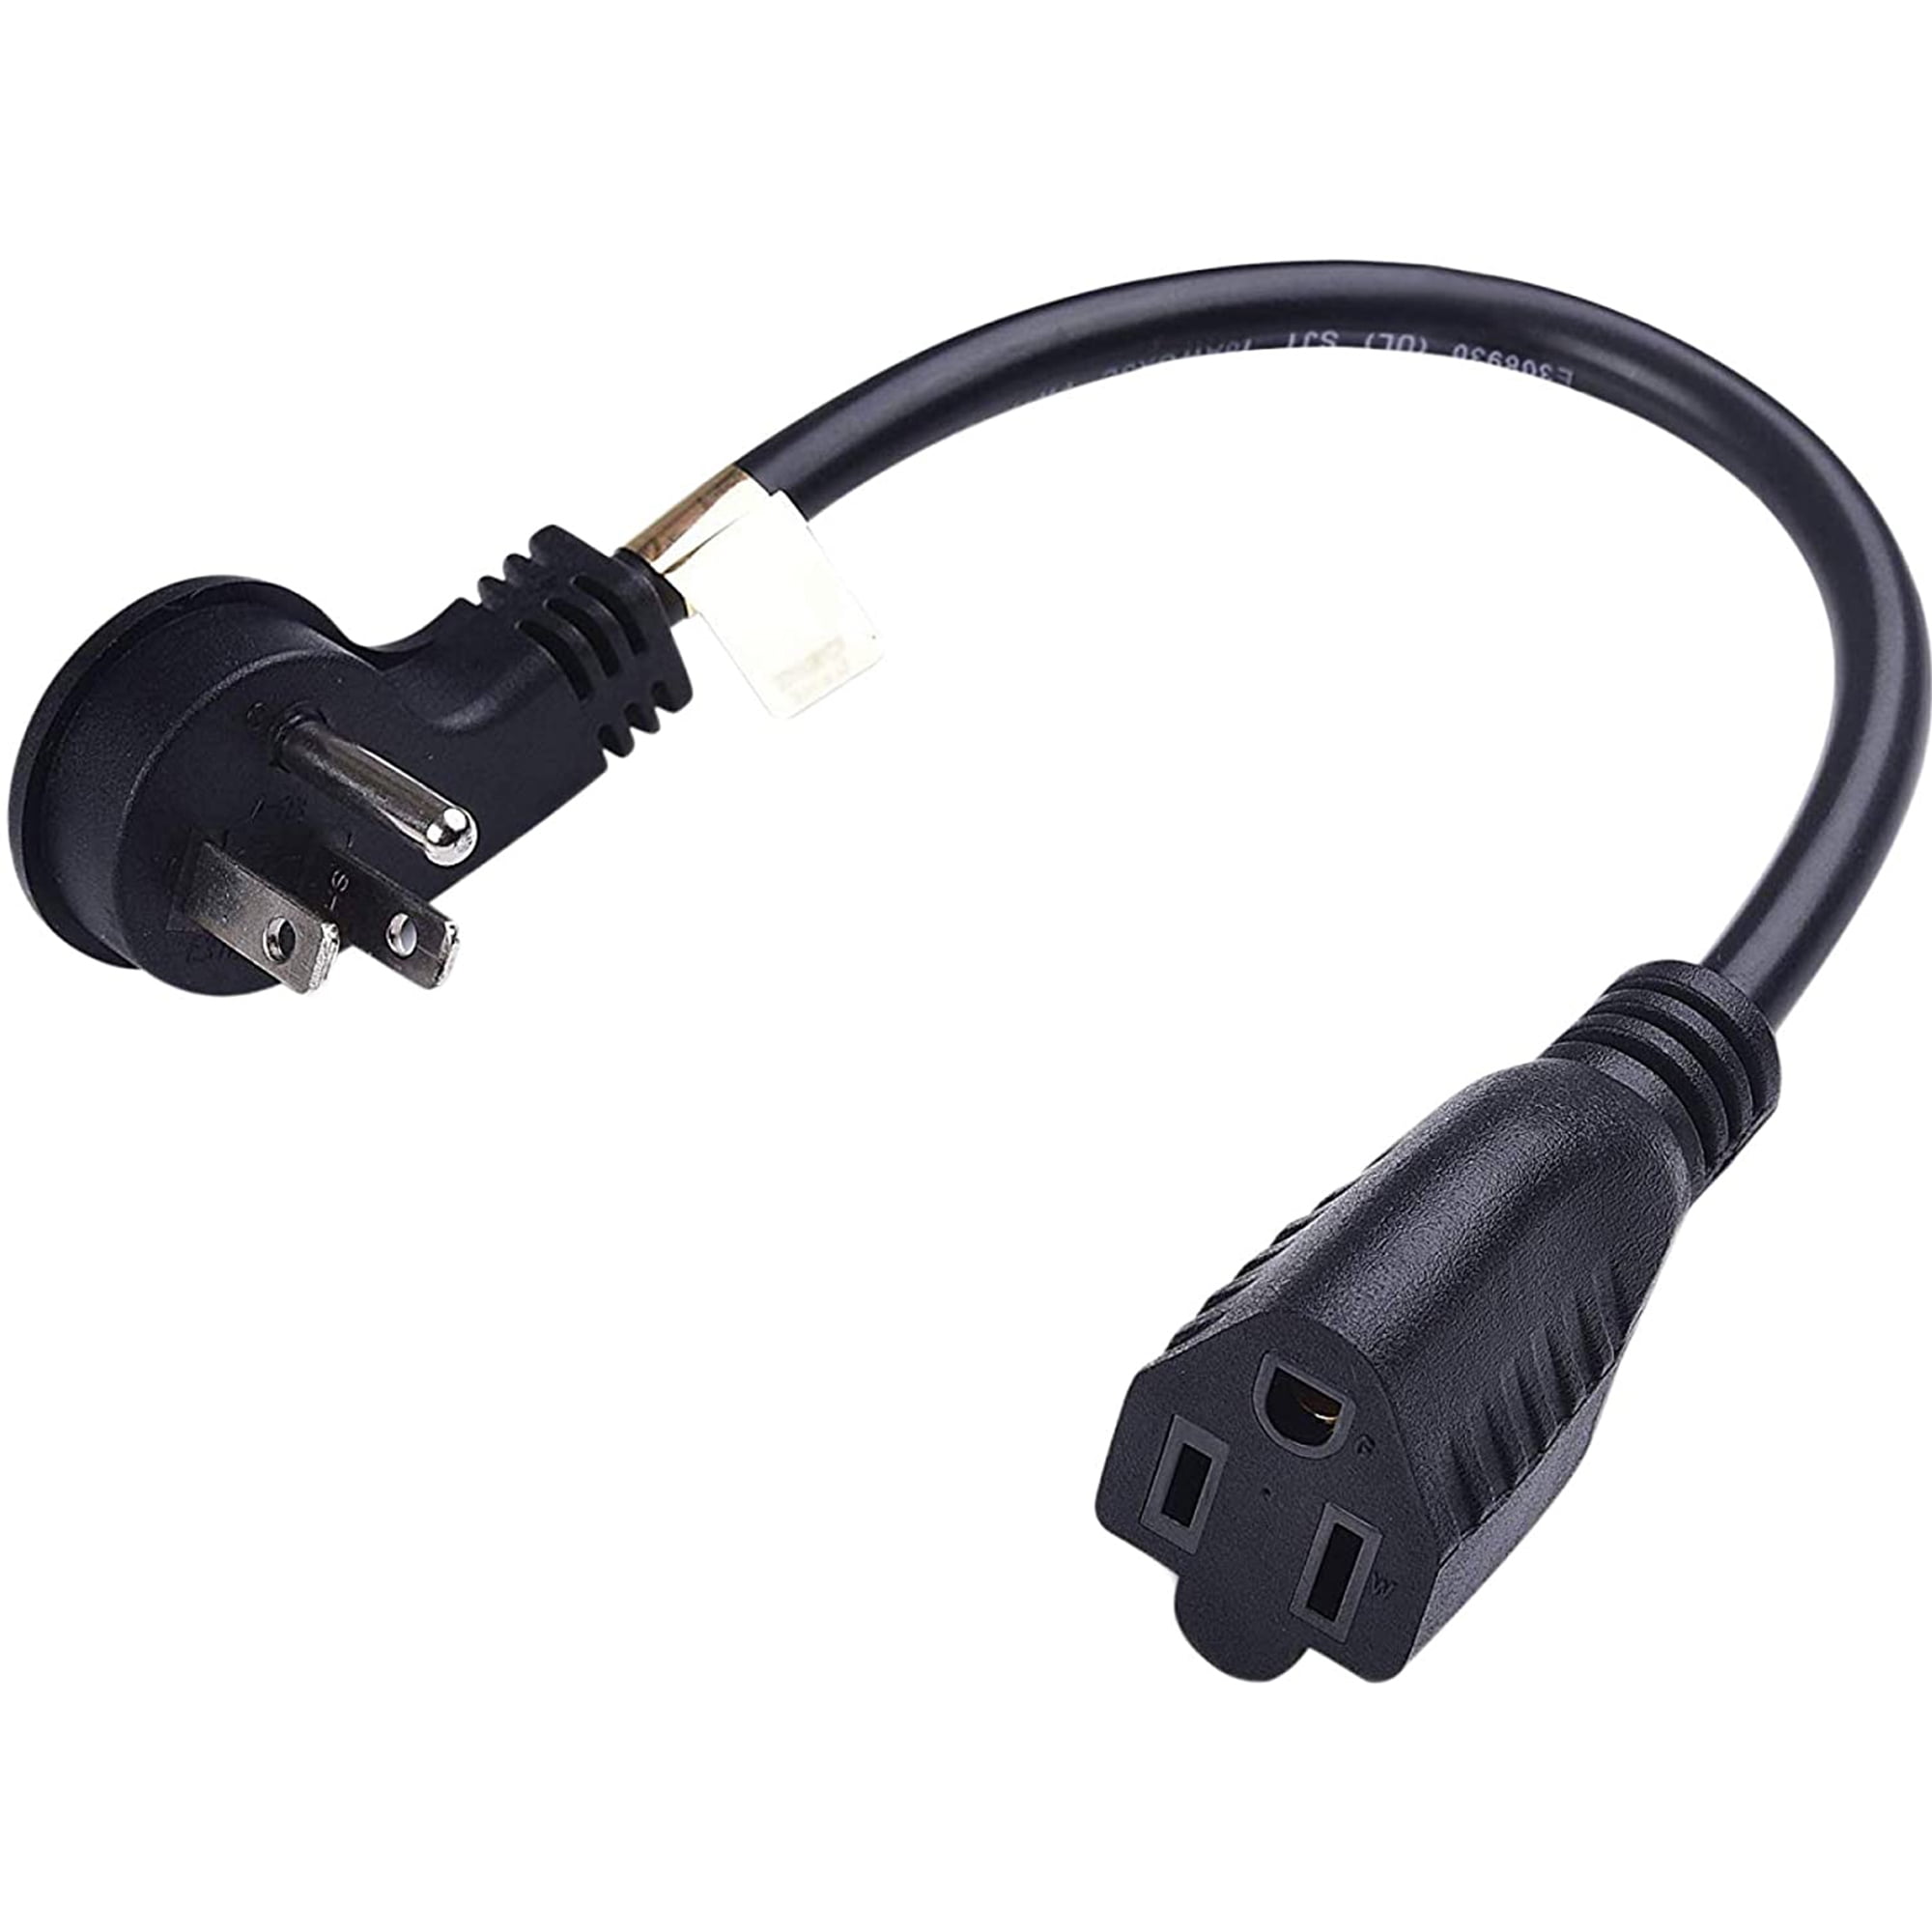 Retractable Ac Power Extension Cord